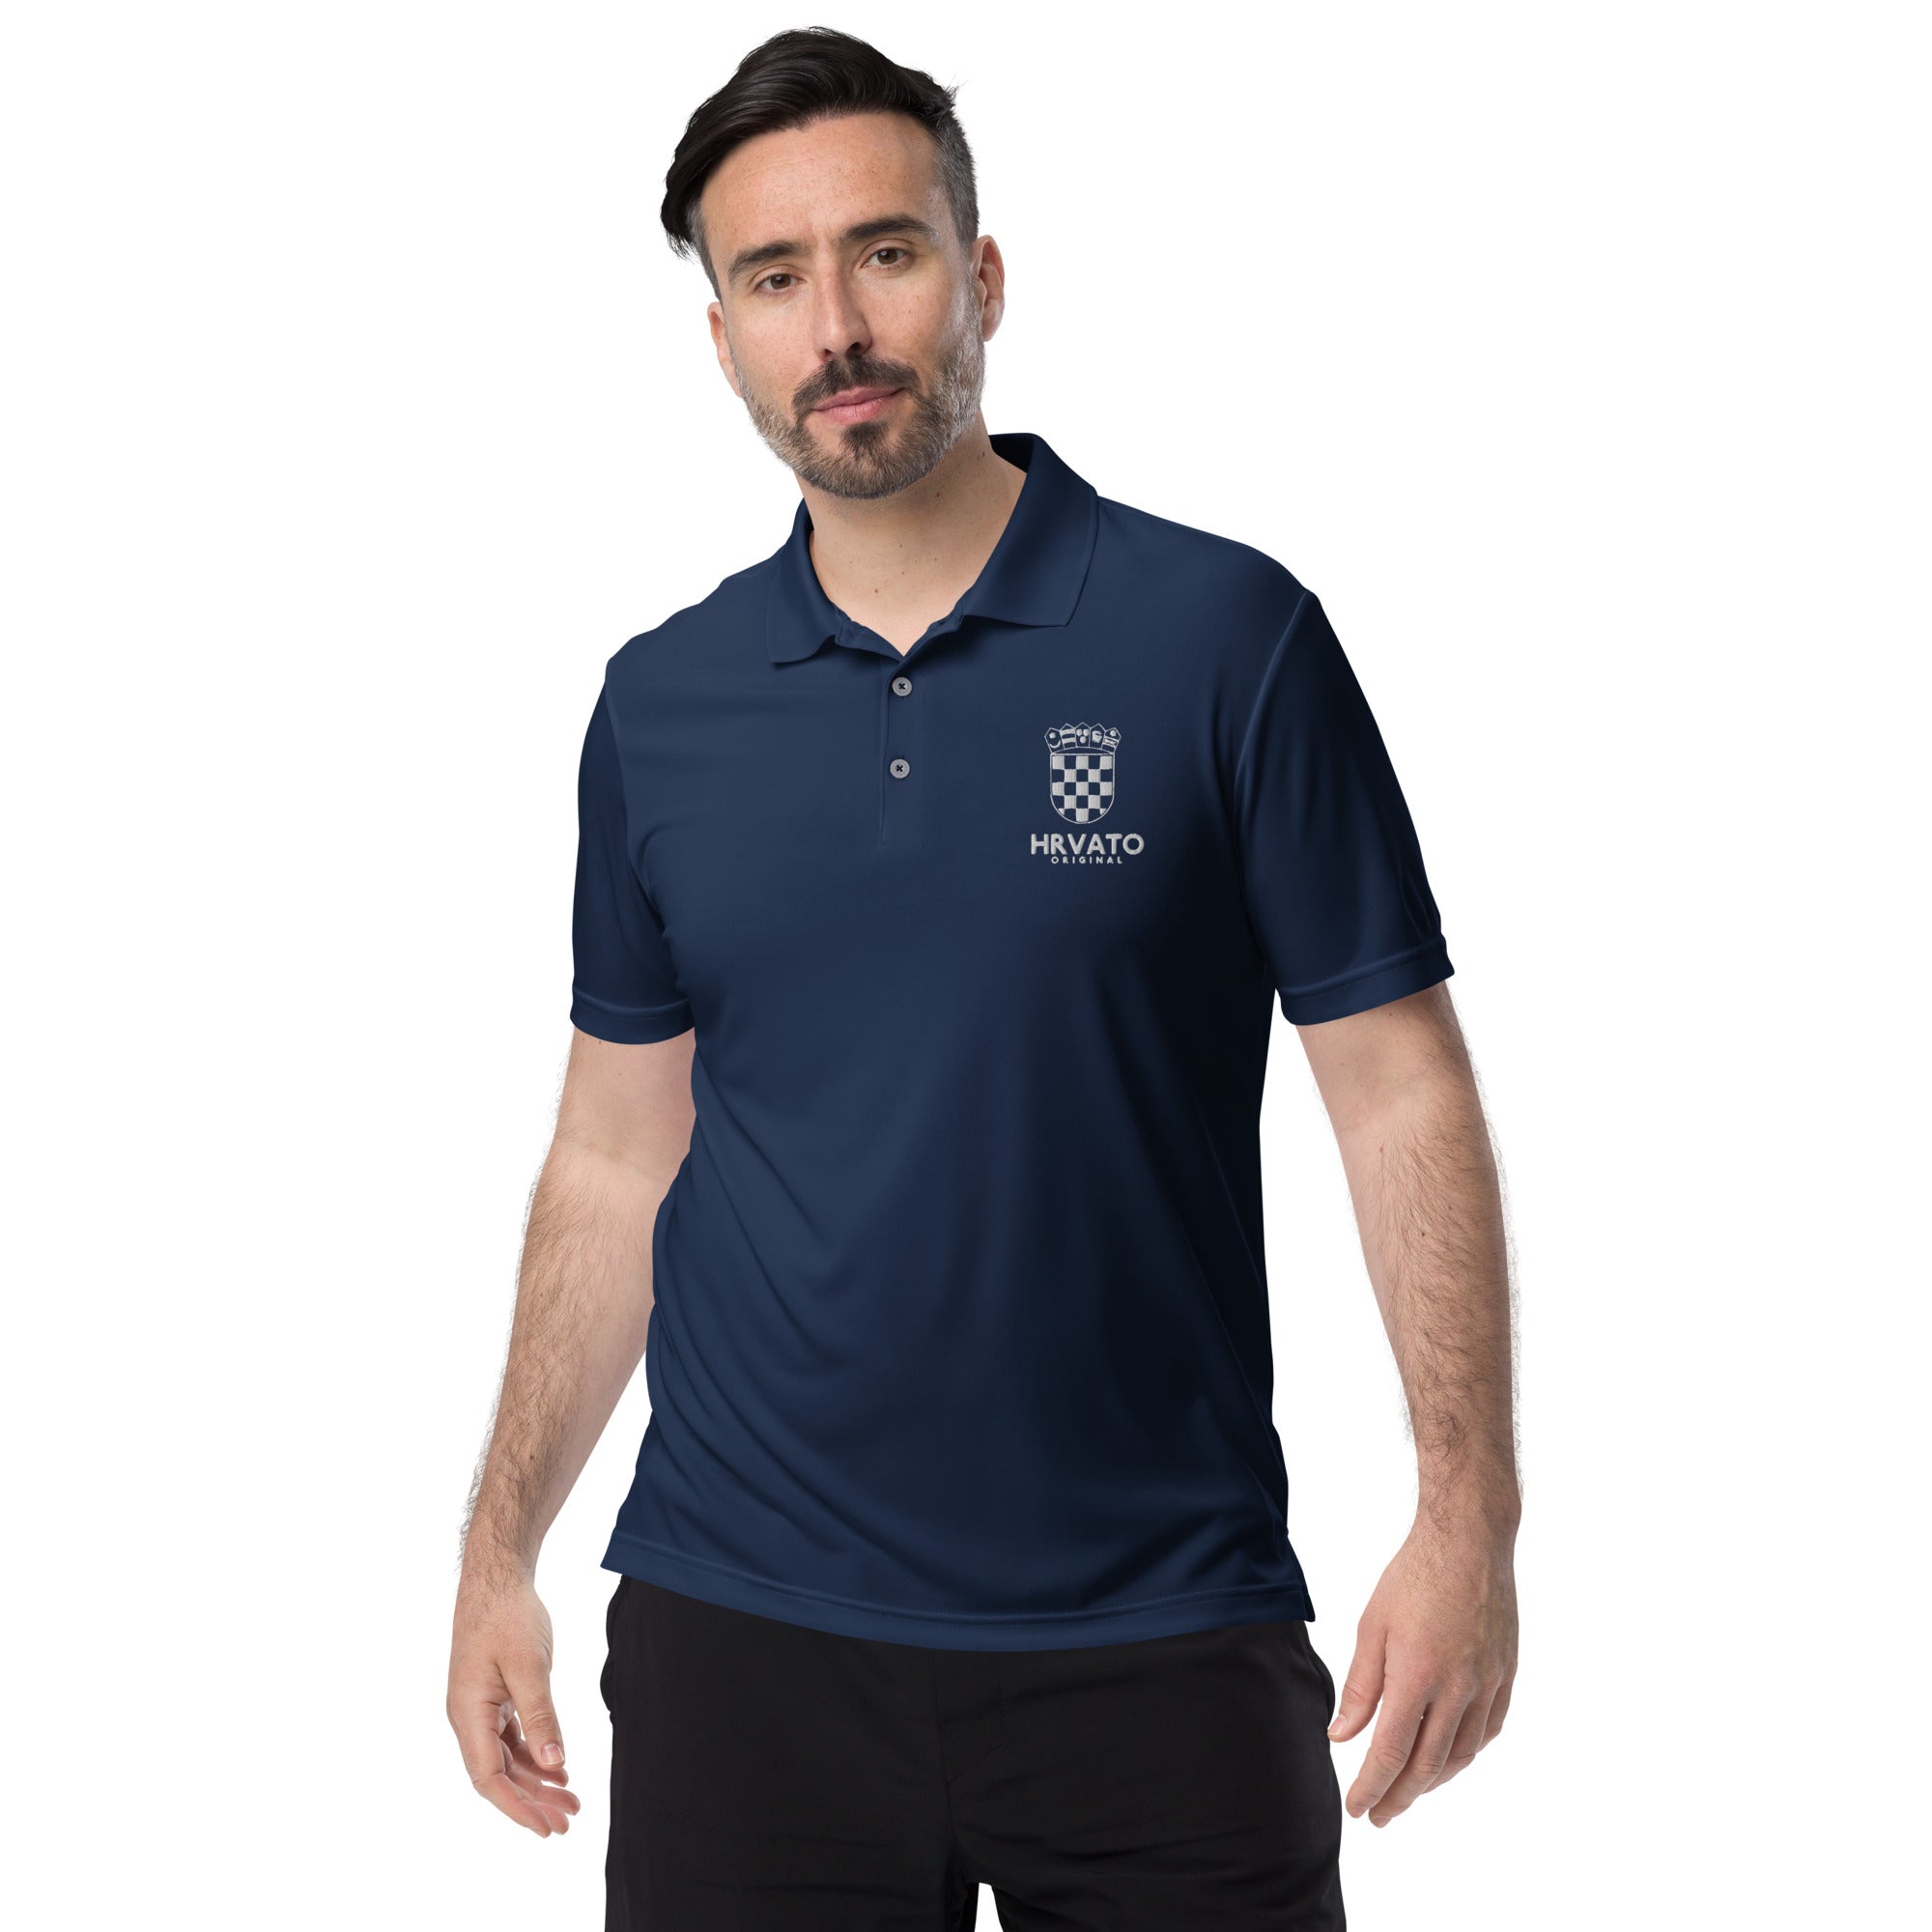 Adidas Hrvato Polo Shirt Croatian Coat of Embroidery. – HRVATO